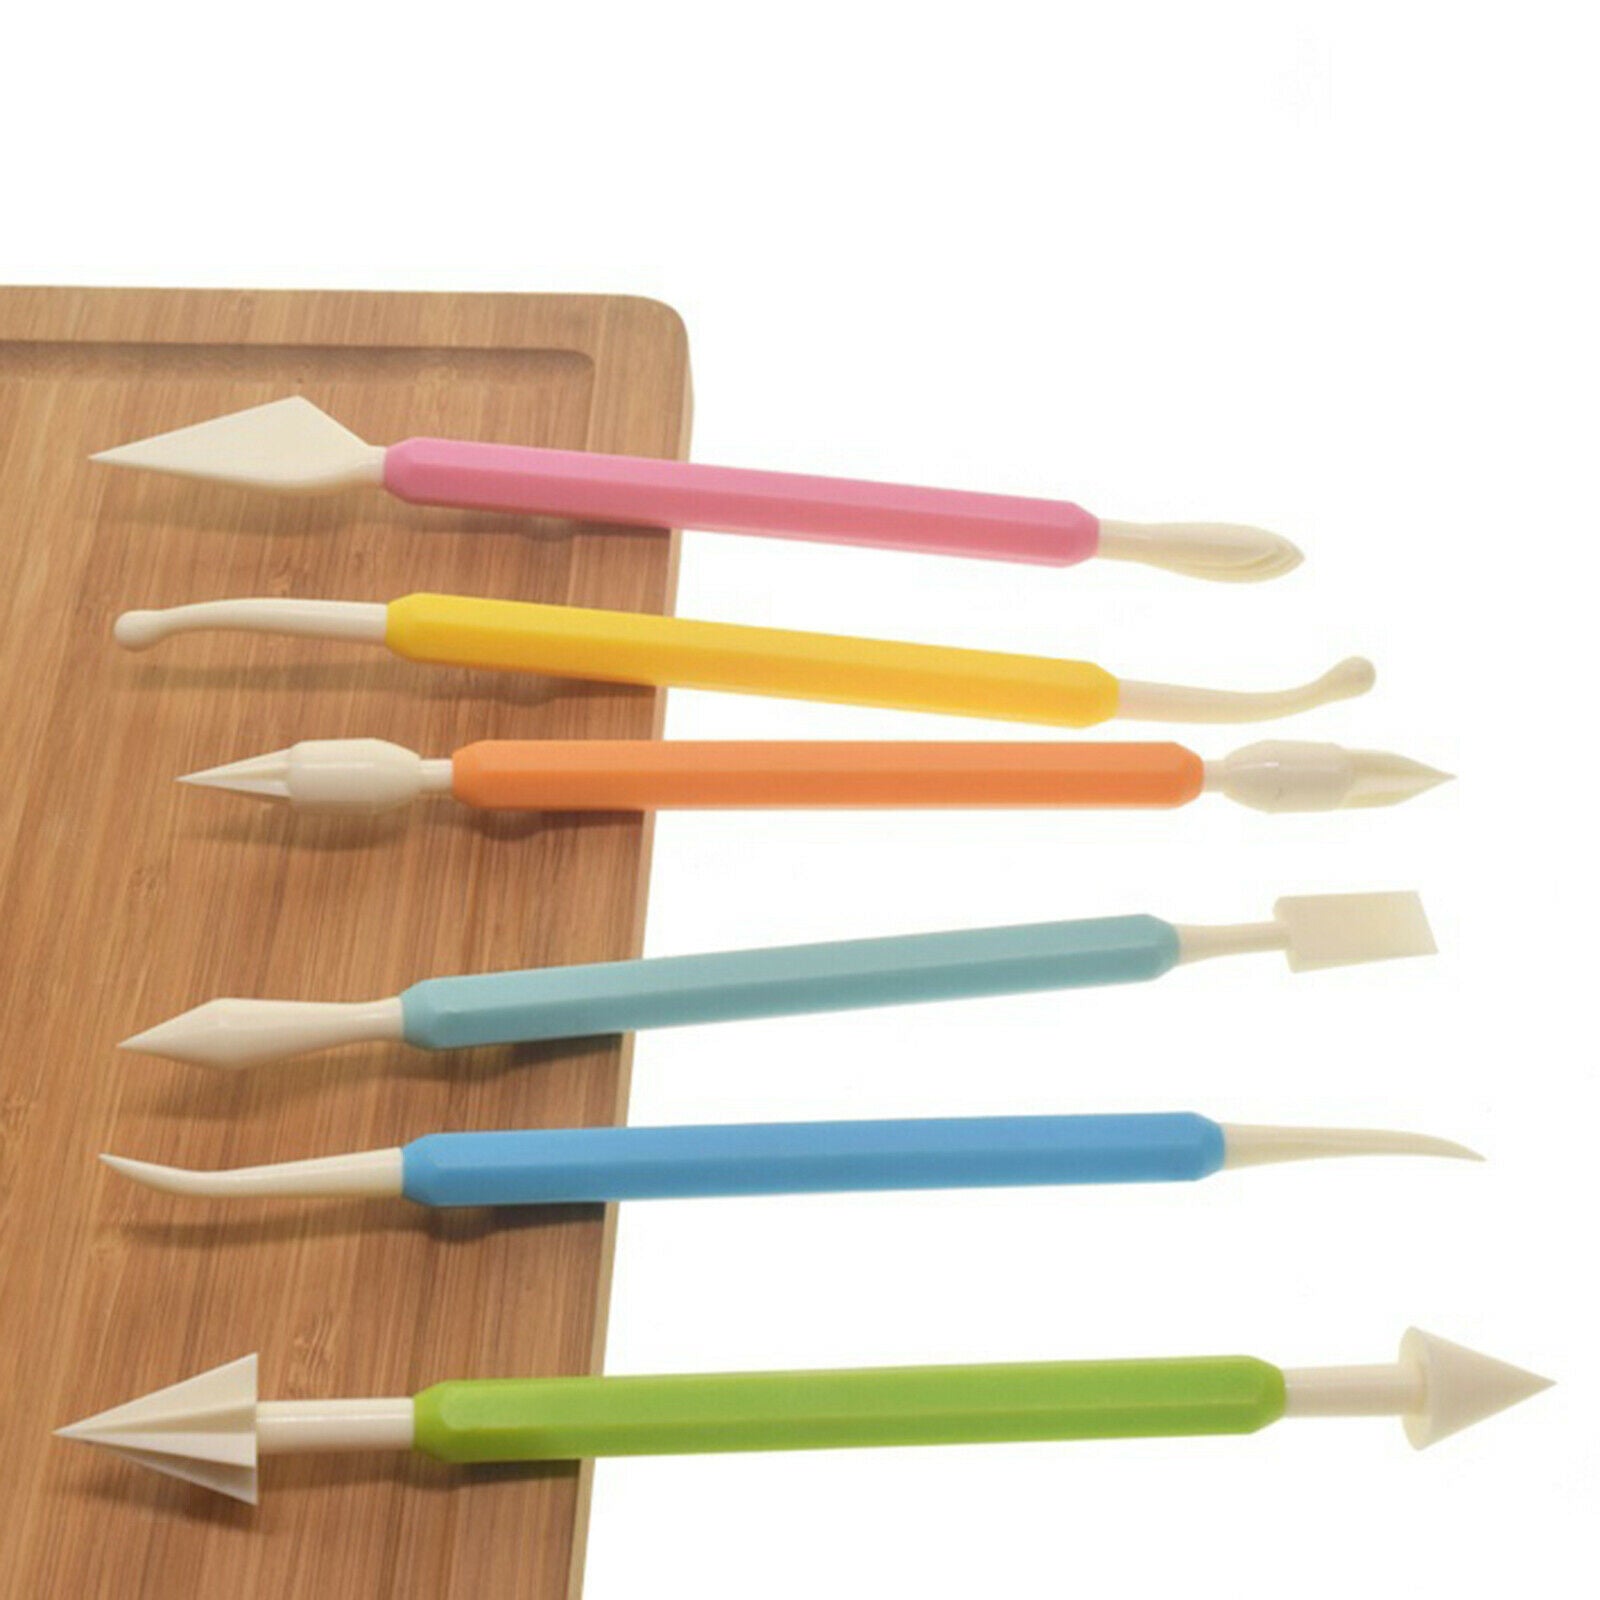 9x Plastic Clay Sculpting Tools Set DIY Ceramic Pottery Modeling Smoothing